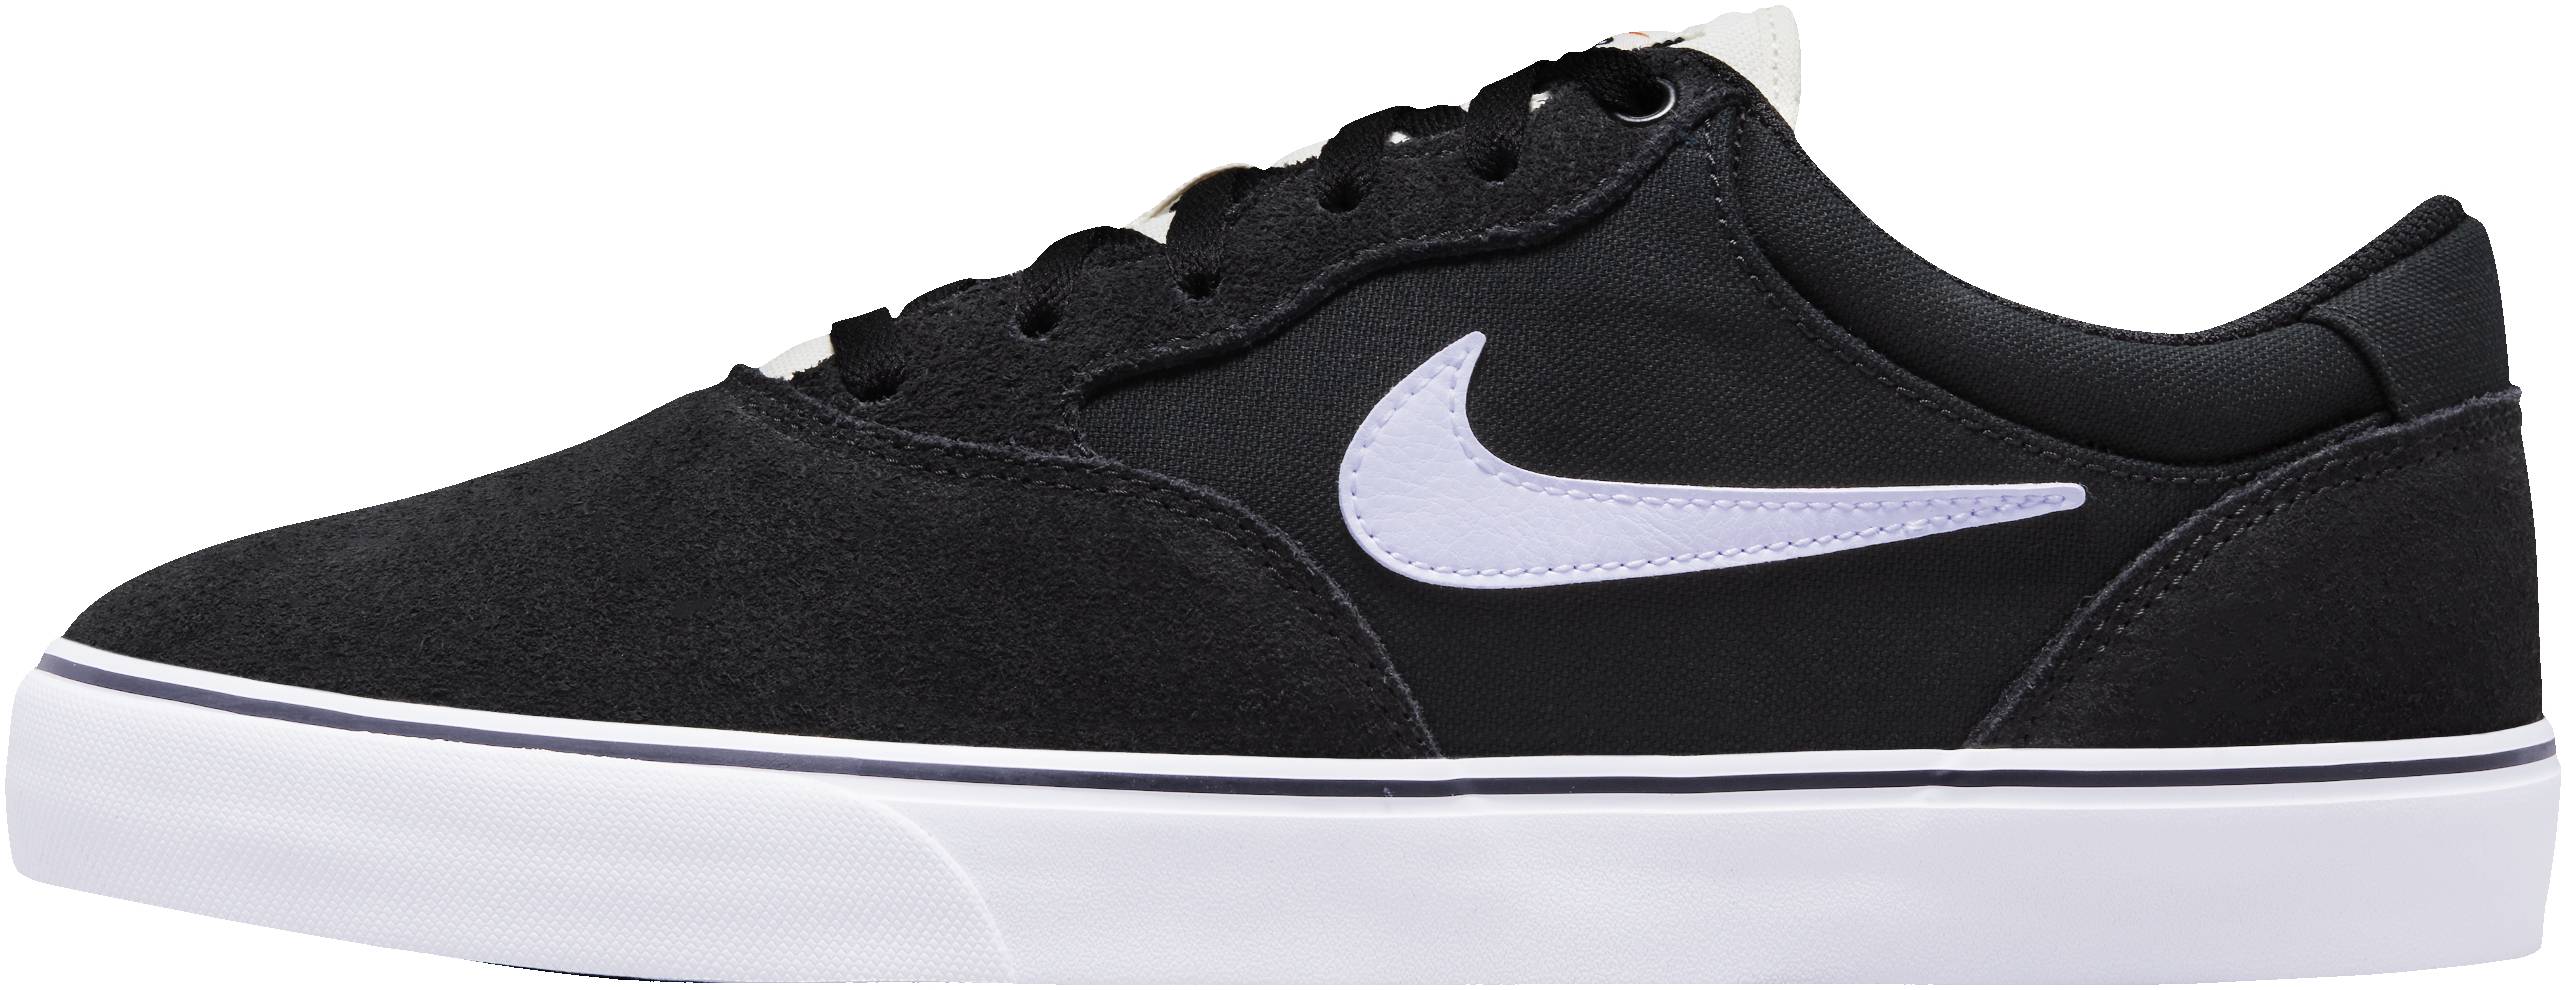 Nike SB Chron 2 sneakers in 8 colors (only $55) | RunRepeat